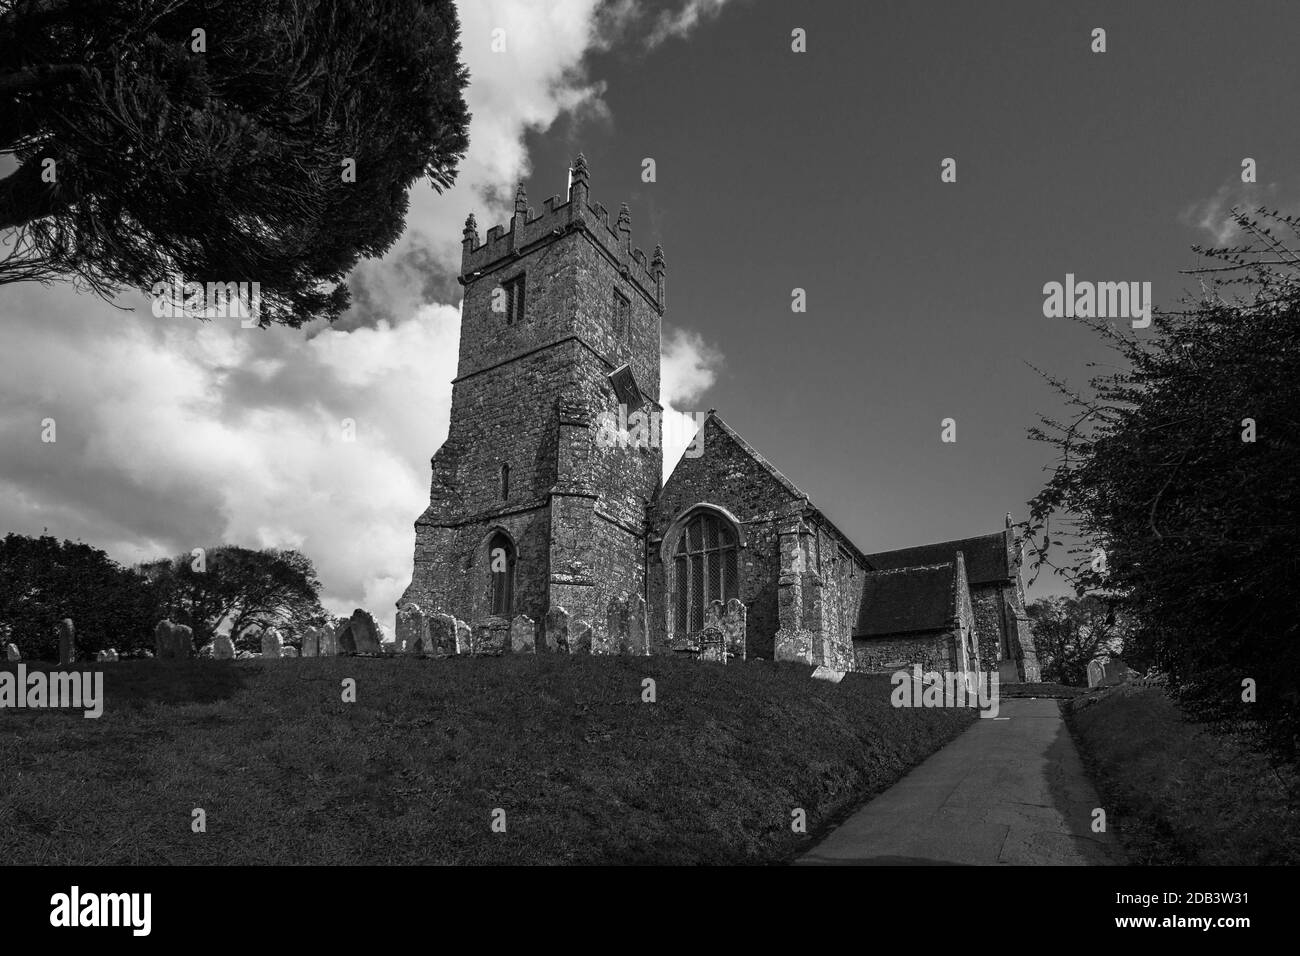 All Saints Church in the picturesque village of Godshill Isle of Wight UK. October 2020 Stock Photo